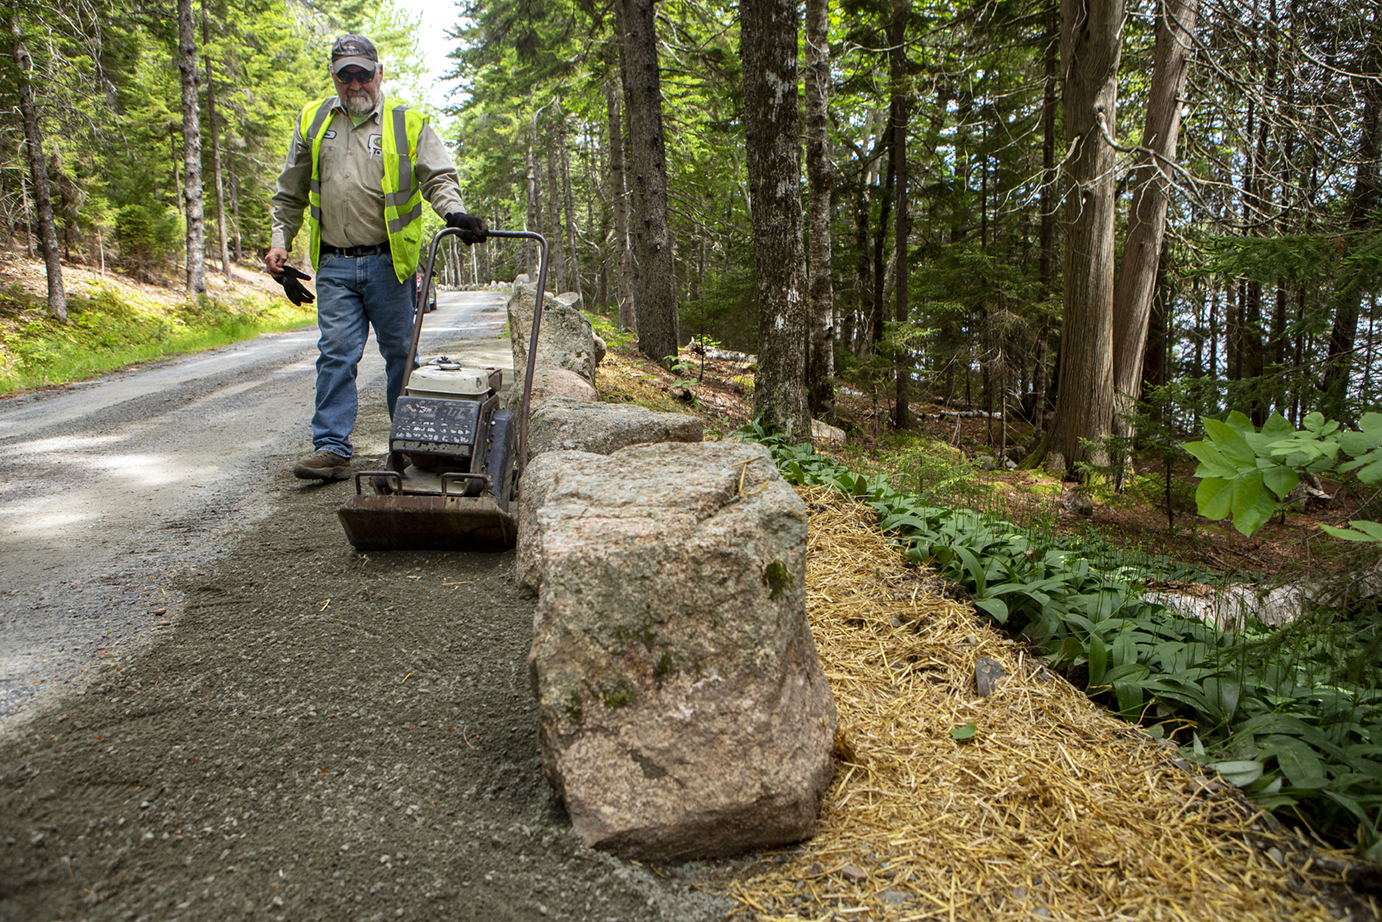 Mike Allen, foreman at Harold MacQuinn, Inc., uses a compacter to compress dirt around coping stones after ﬁnishing work to regrade an area of the Eagle Lake section of the carriage road. 